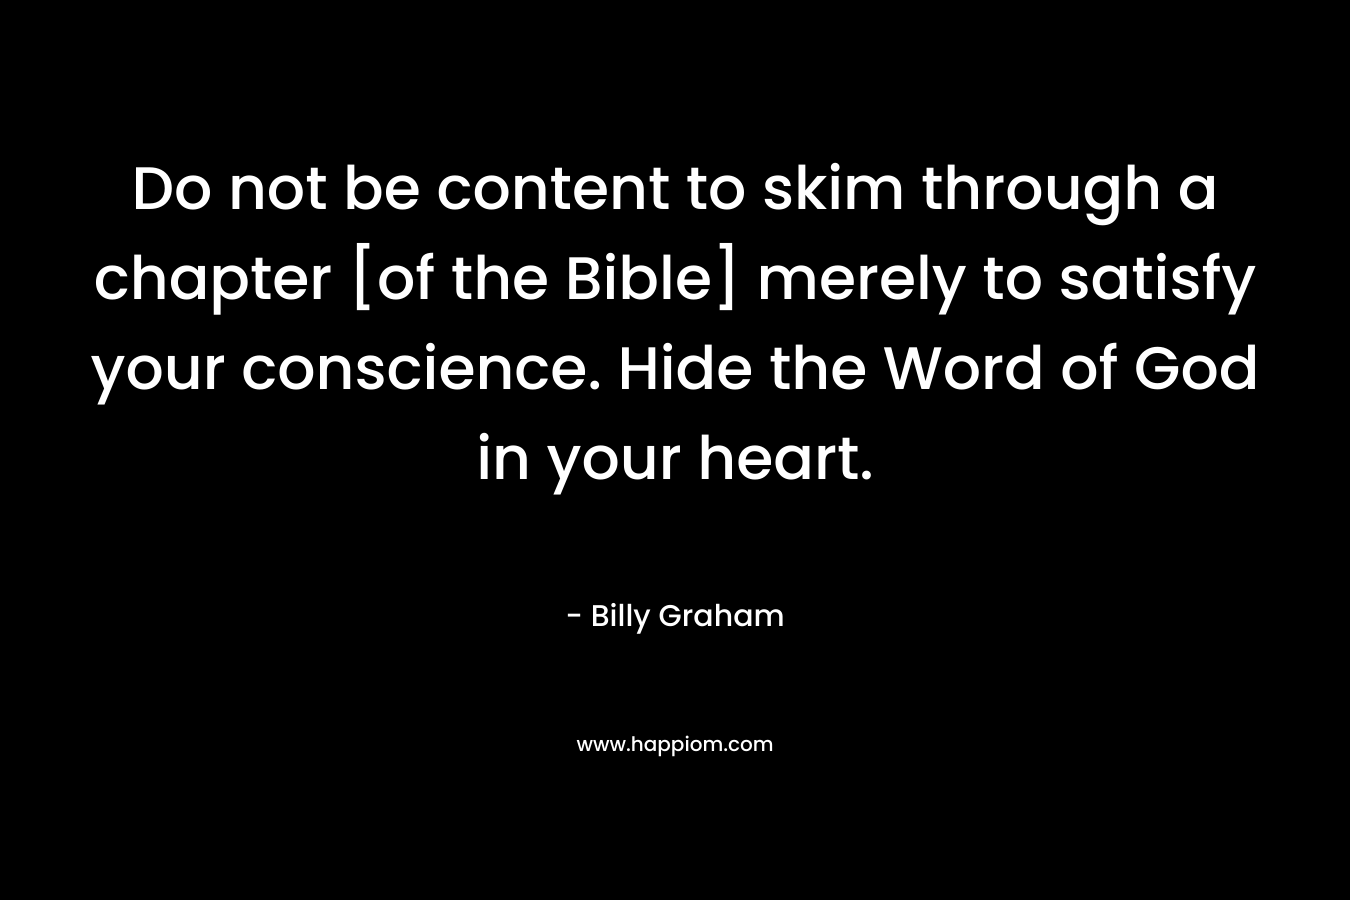 Do not be content to skim through a chapter [of the Bible] merely to satisfy your conscience. Hide the Word of God in your heart.